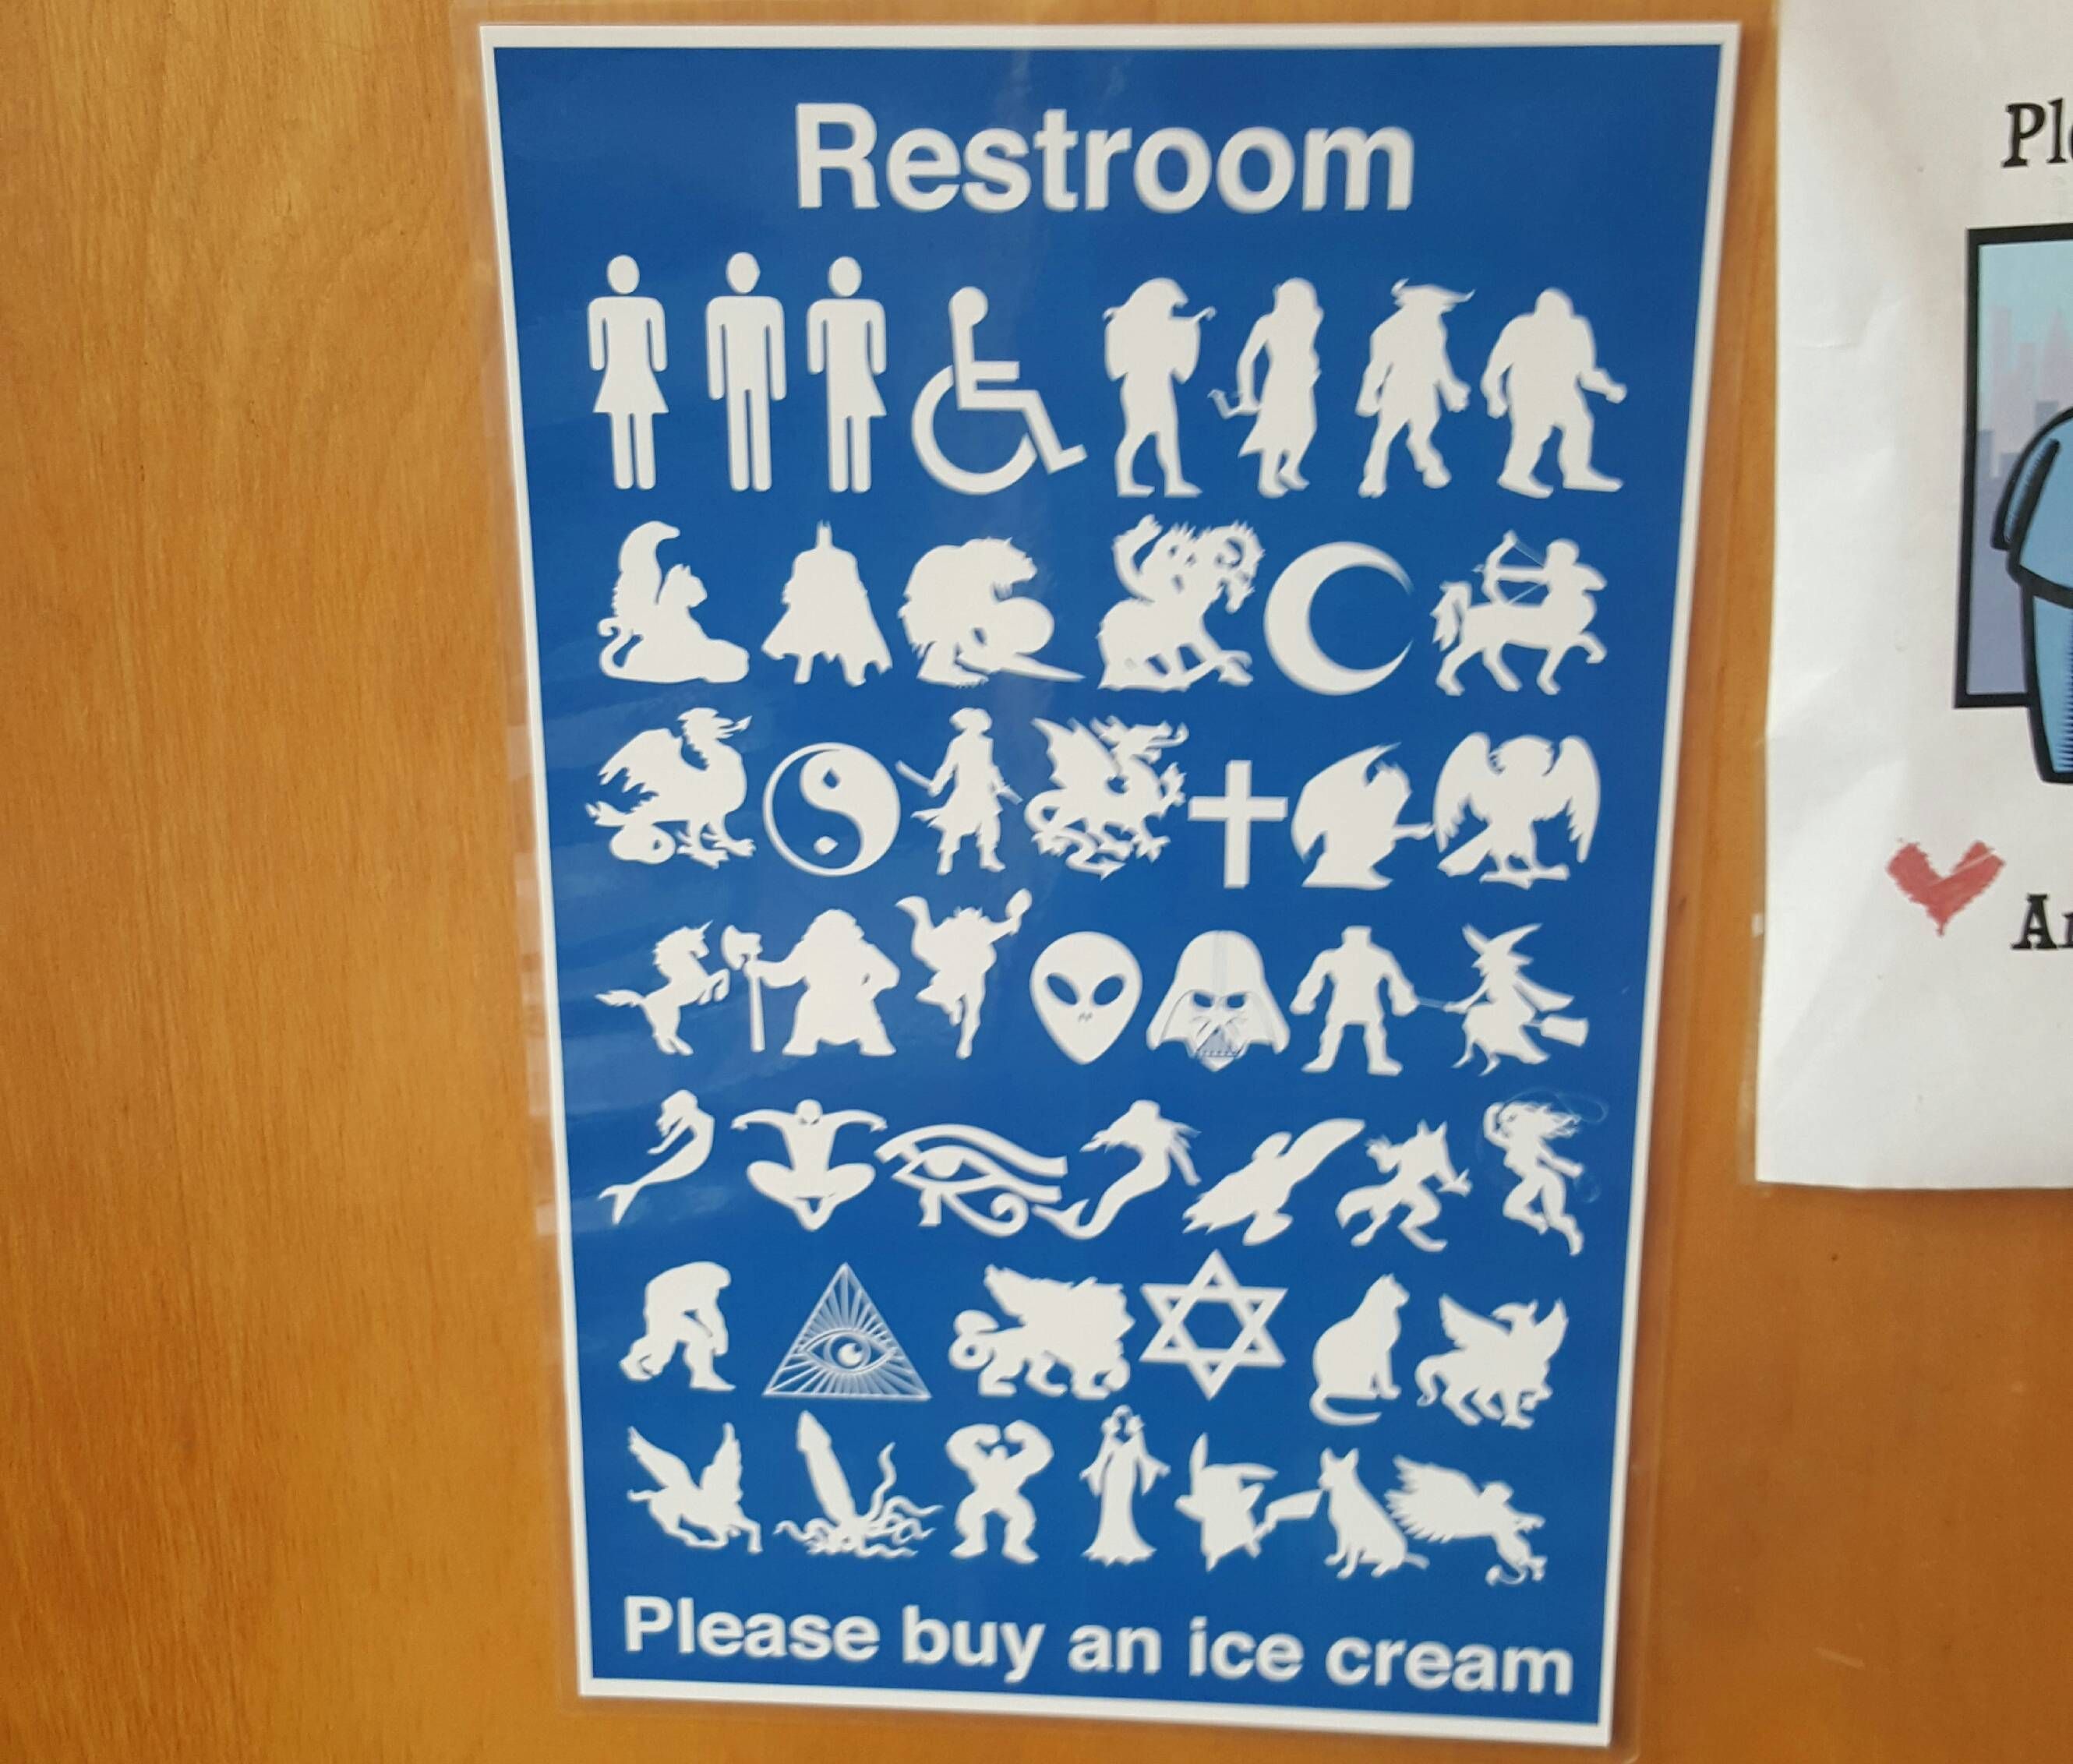 This was at the restroom of my local ice cream ream shop